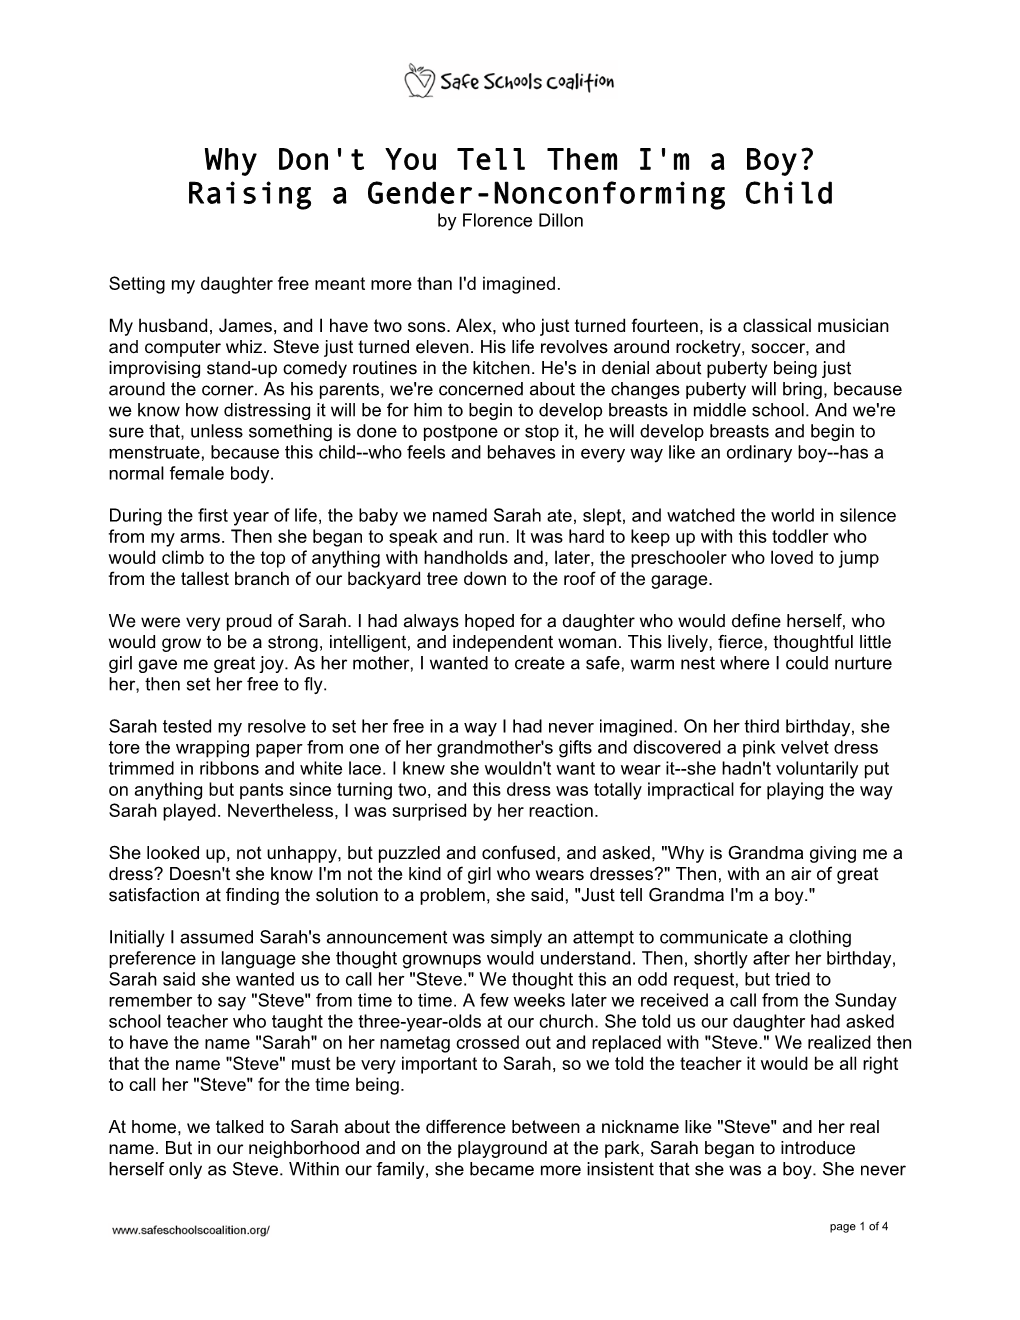 Why Don't You Tell Them I'm a Boy? Raising a Gender-Nonconforming Child by Florence Dillon